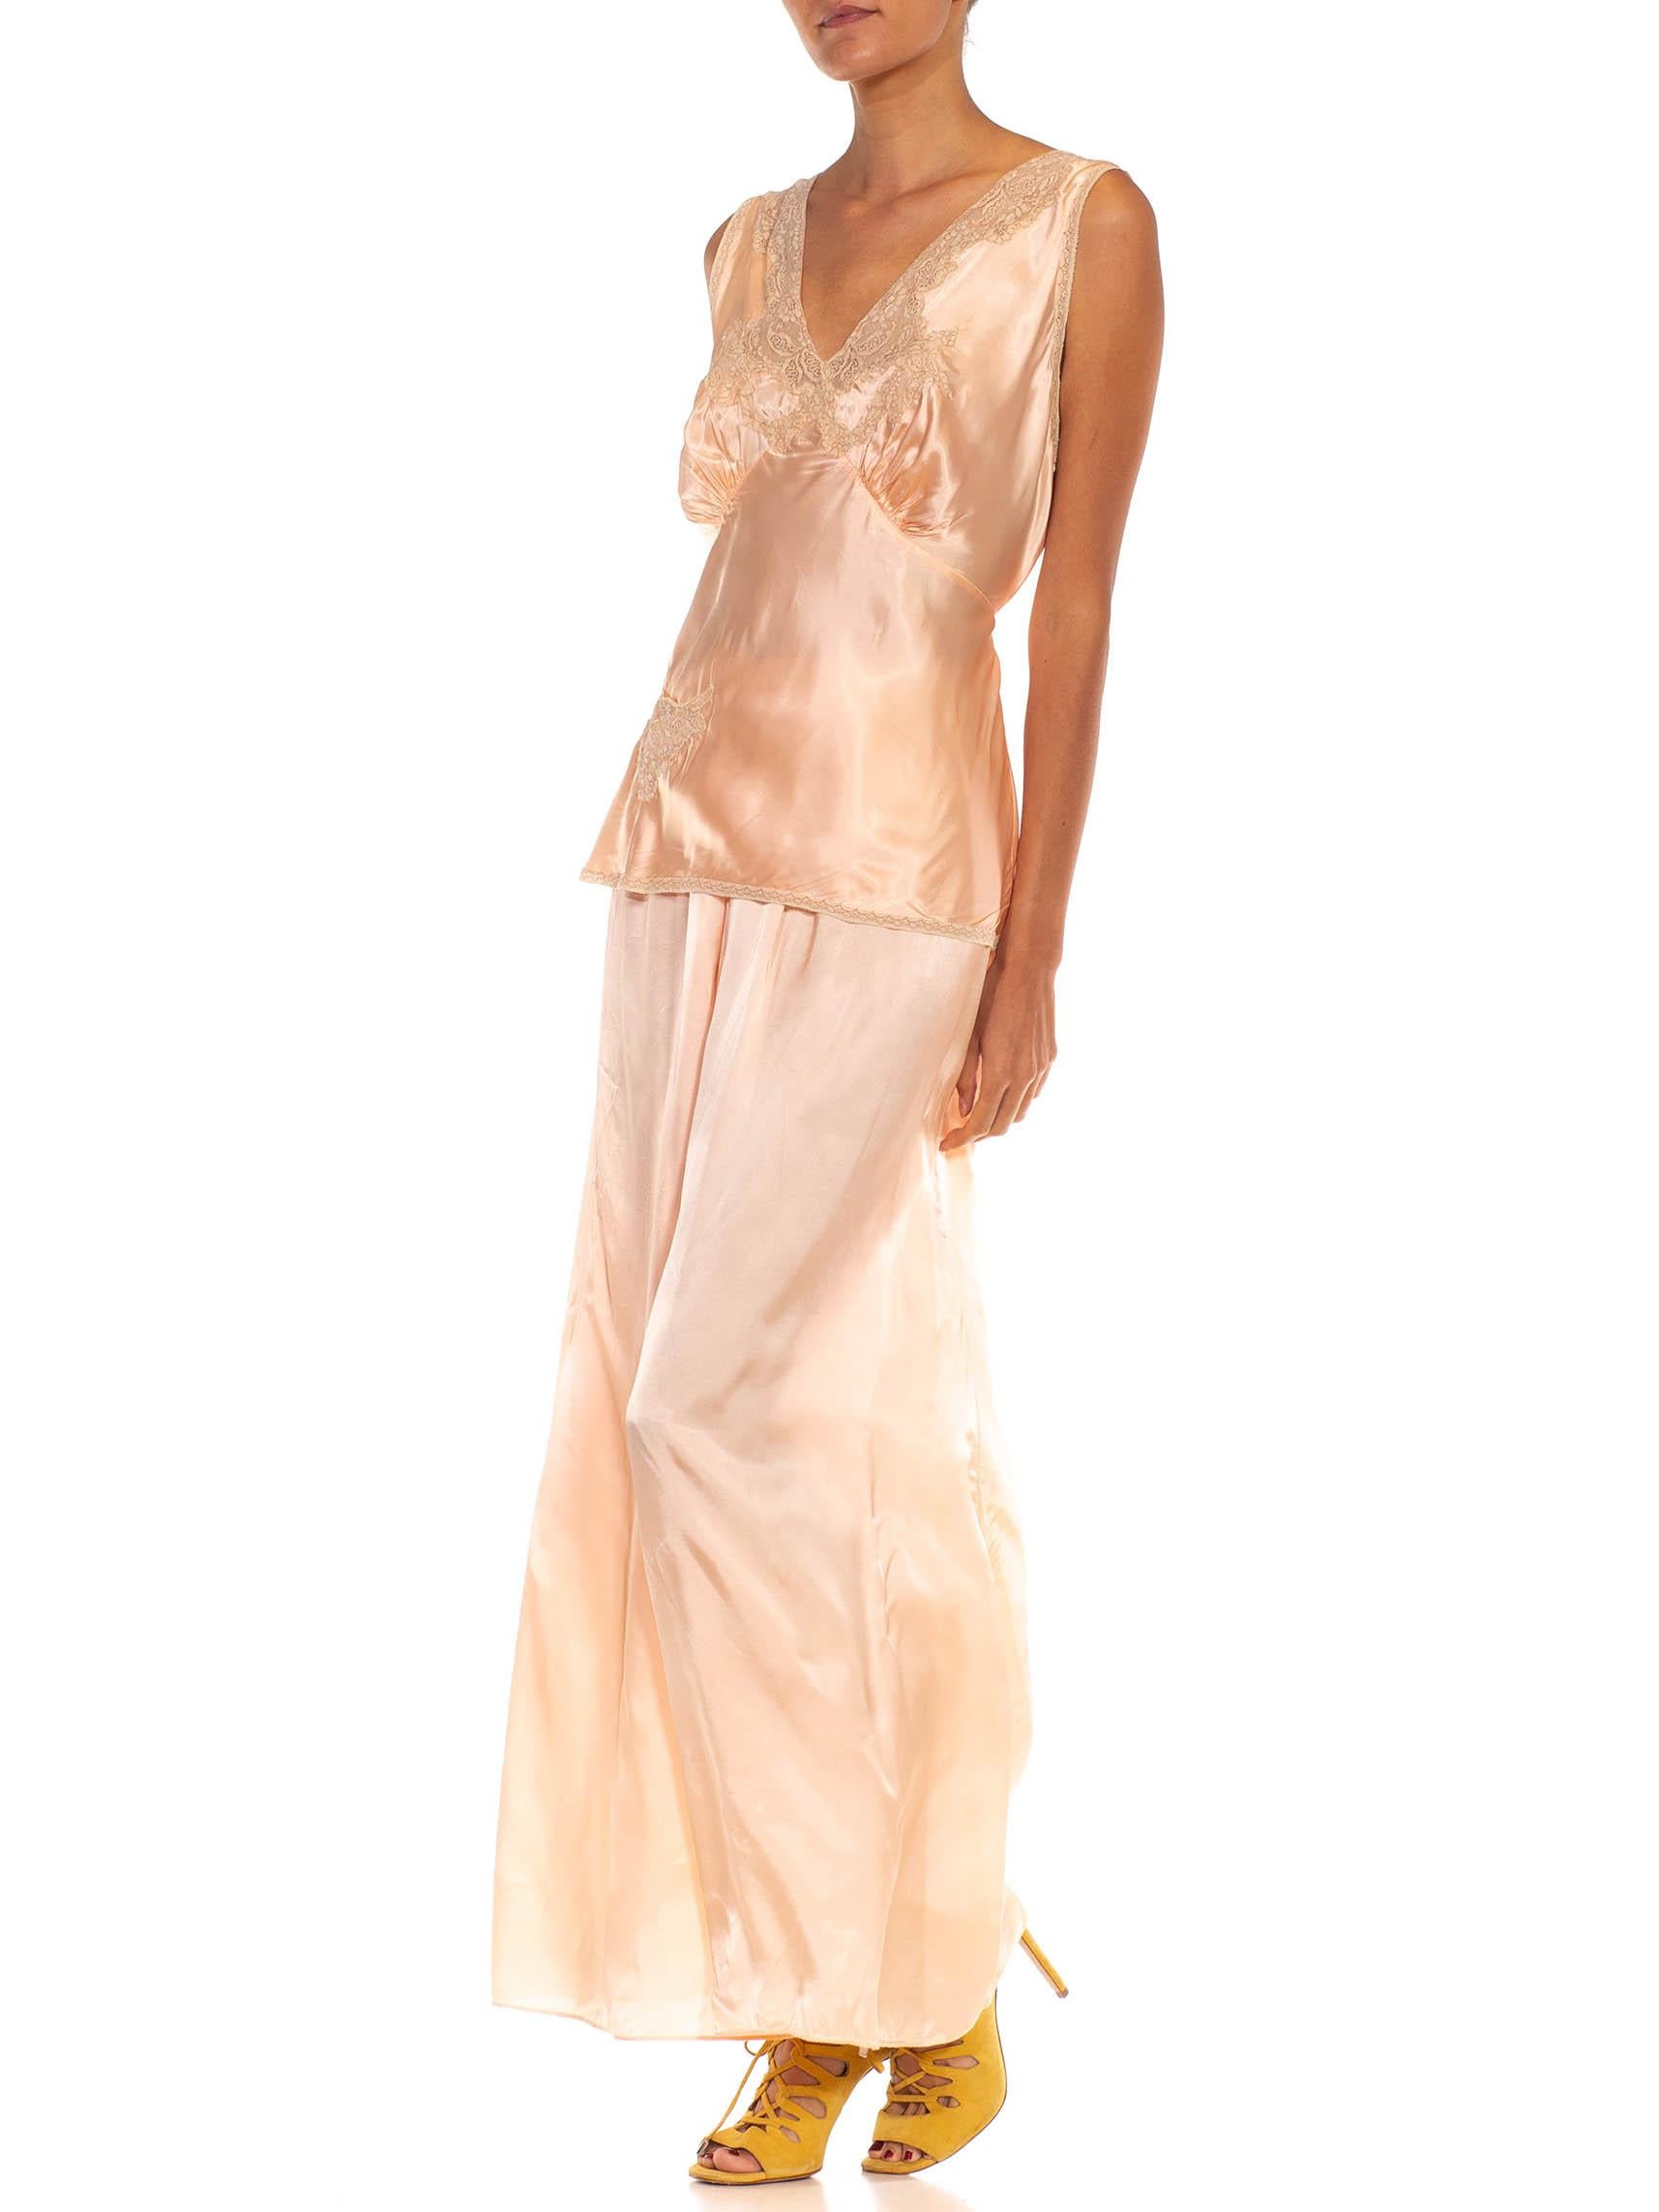 1940S Peach & Cream Rayon Satin Lace Pajama Ensemble In Excellent Condition For Sale In New York, NY